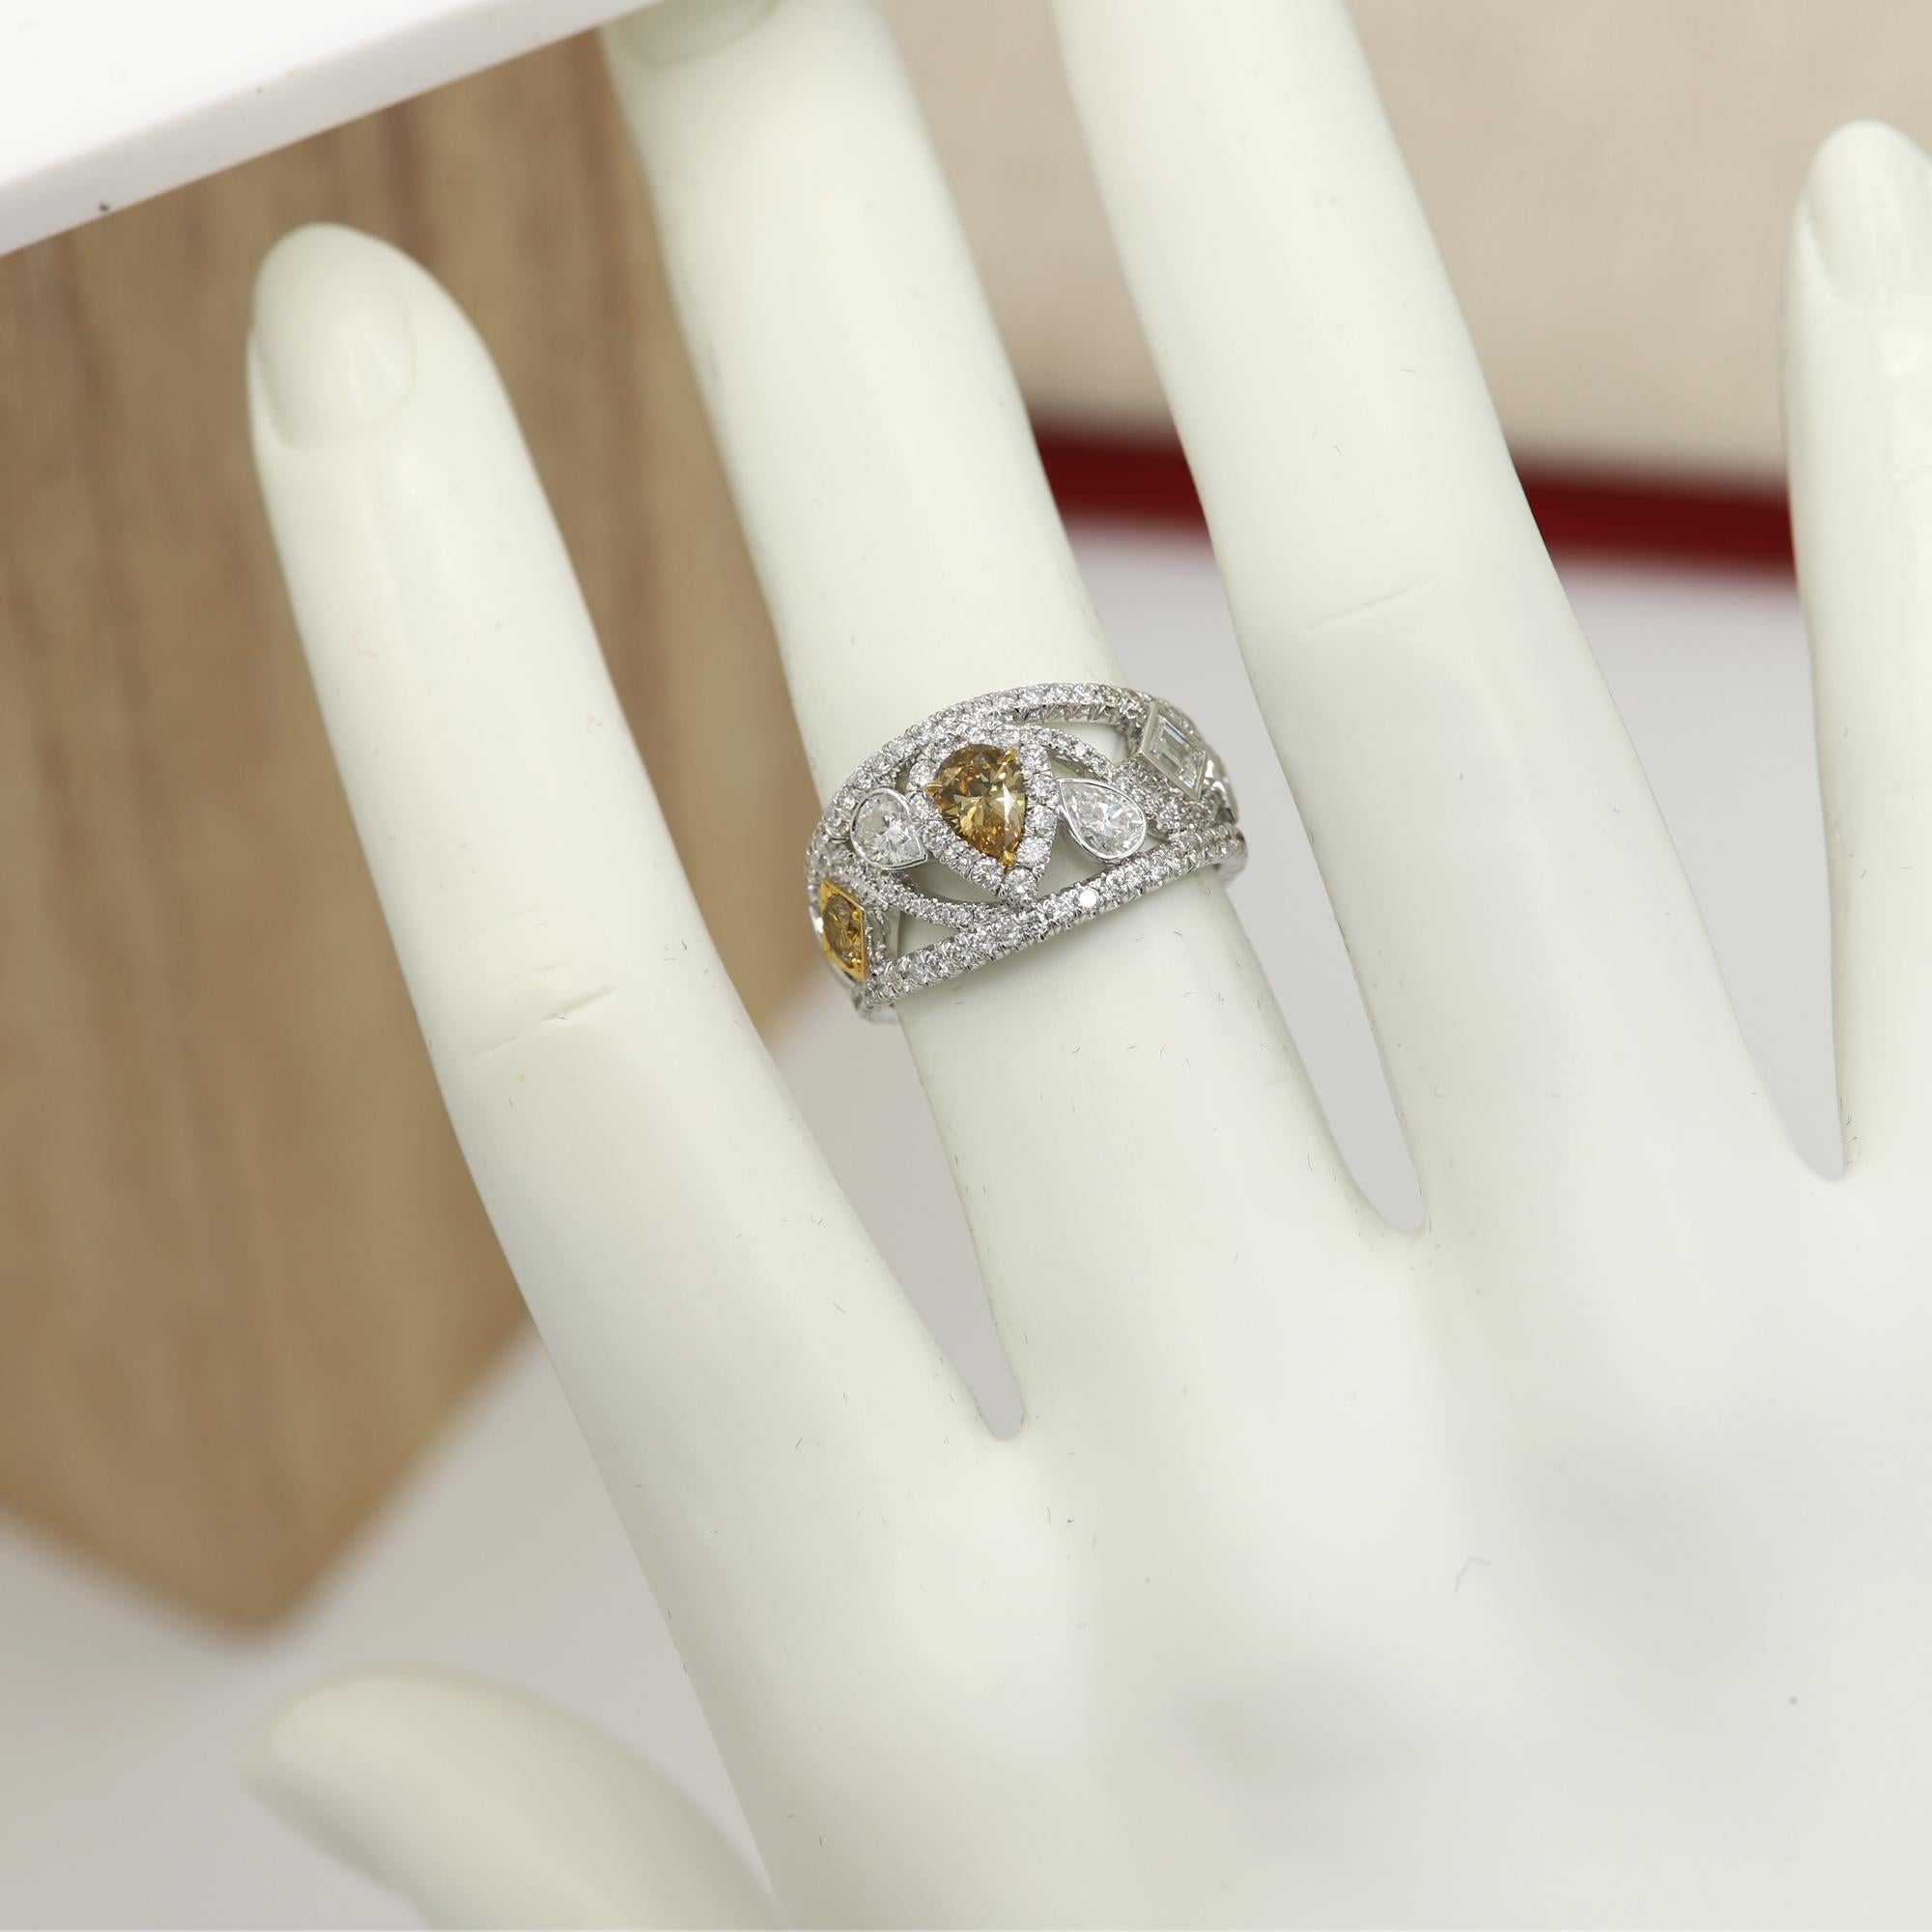 Brown Champagne Diamond Ring Band with Mix Shape Diamonds 18 Karat White Gold In New Condition For Sale In Brooklyn, NY